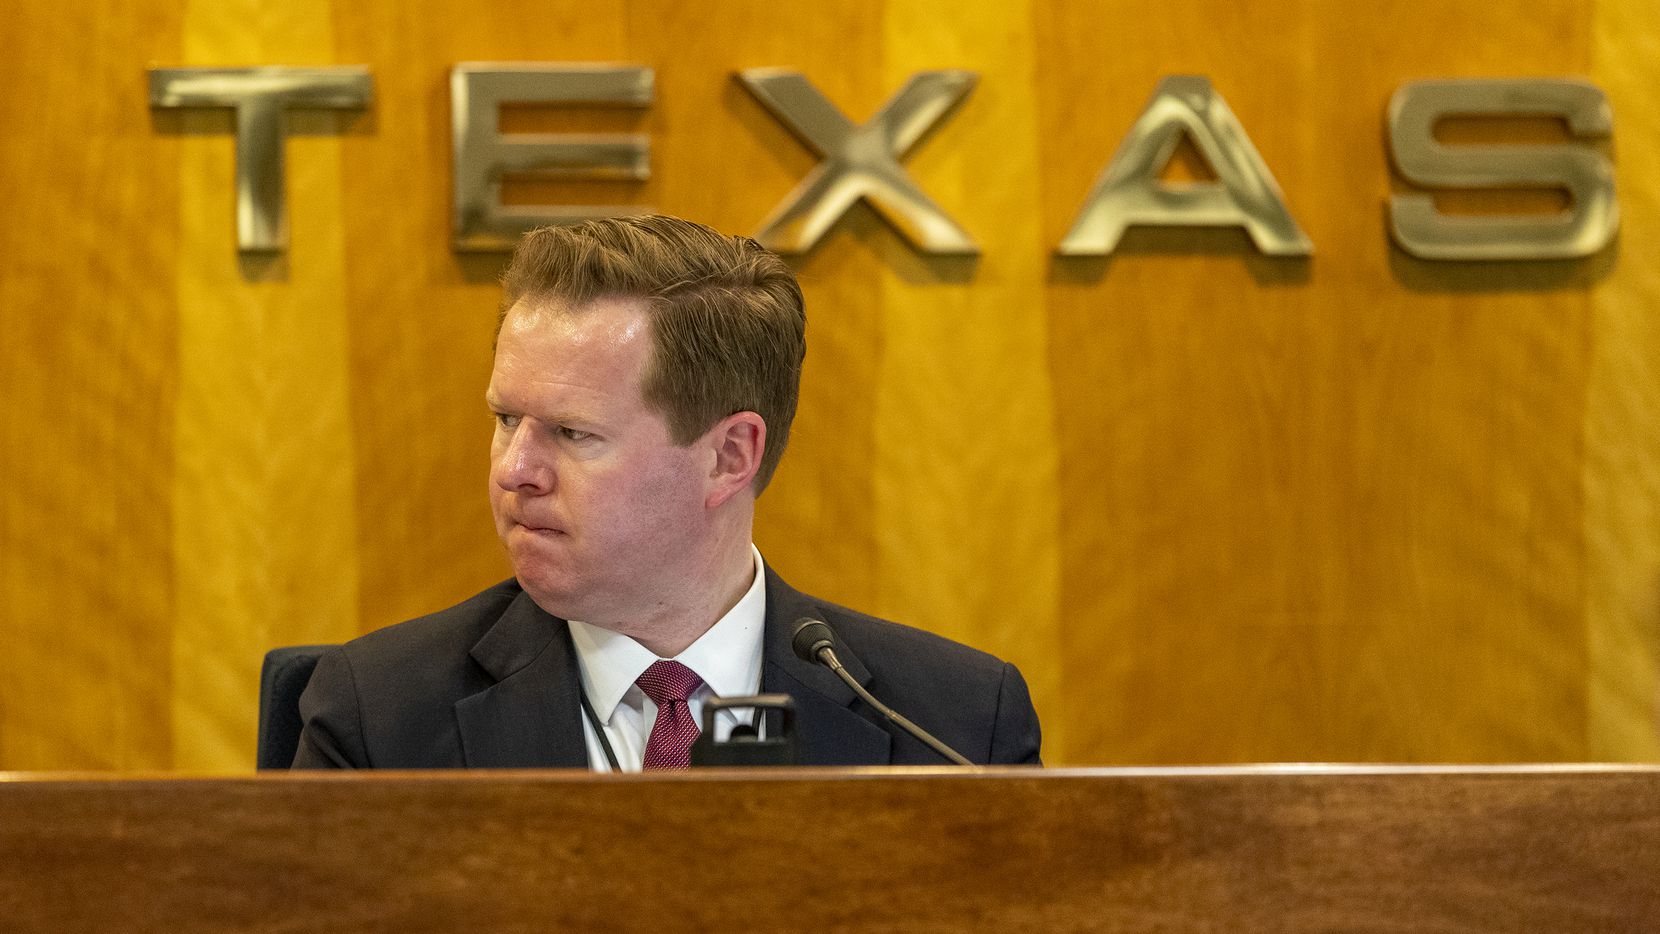 Public Utility Commission of Texas chairman Peter Lake listens to testimony during a commissioners meeting inside the William B. Travis Bldg in downtown Austin, Thursday, Oct., 28, 2021. (Stephen Spillman/Special Contributor)